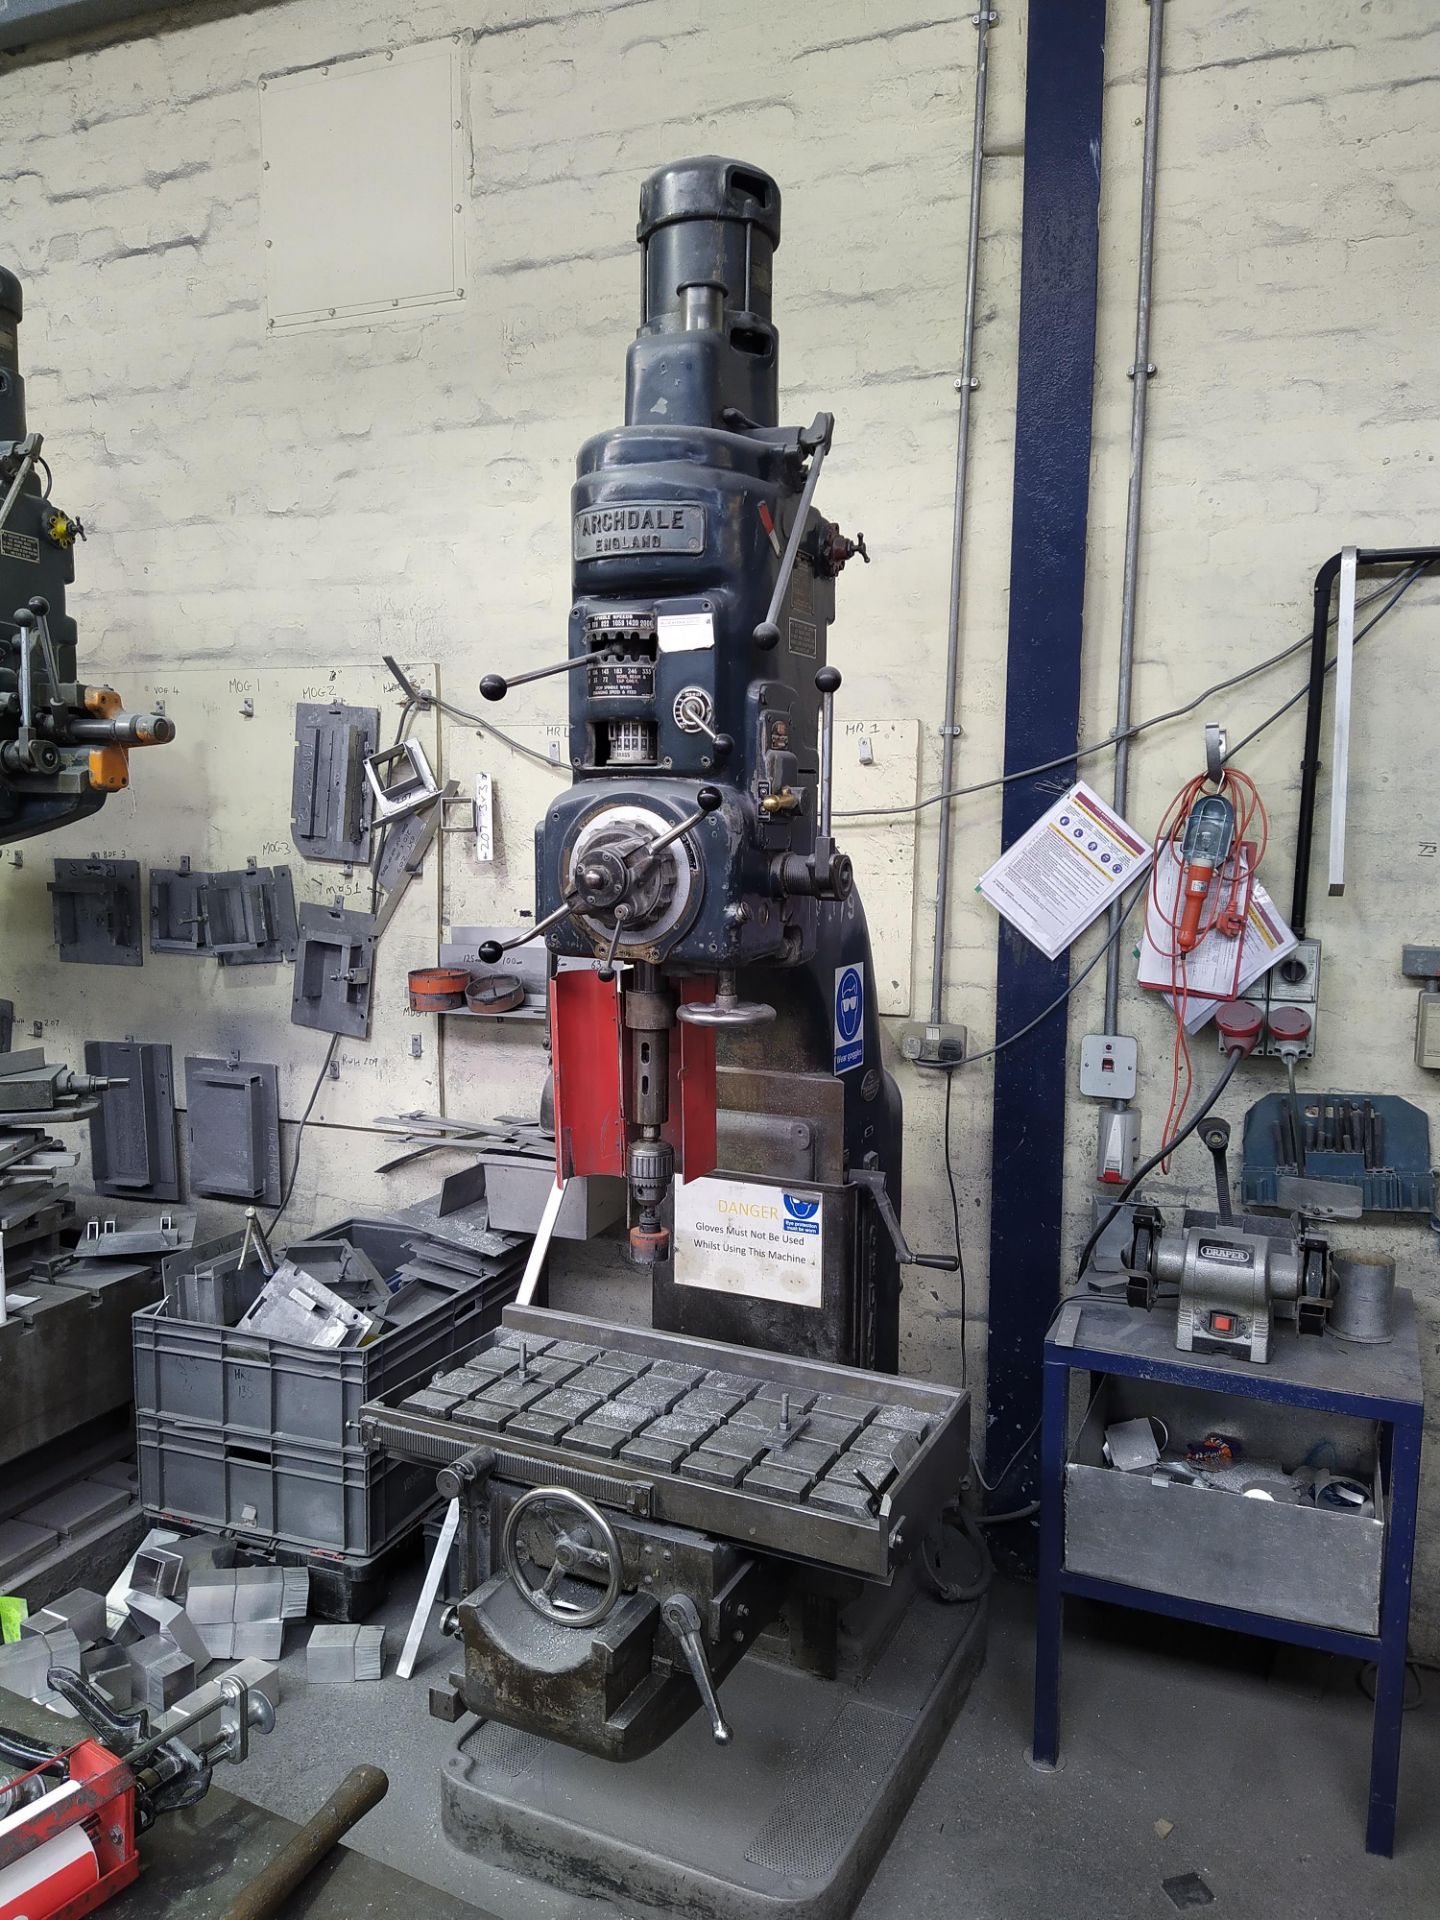 Archdale 560 3ft Radial Arm Drill, serial no. RD 12569, dimensions approx. 190cm wide, 293cm high, - Image 2 of 2